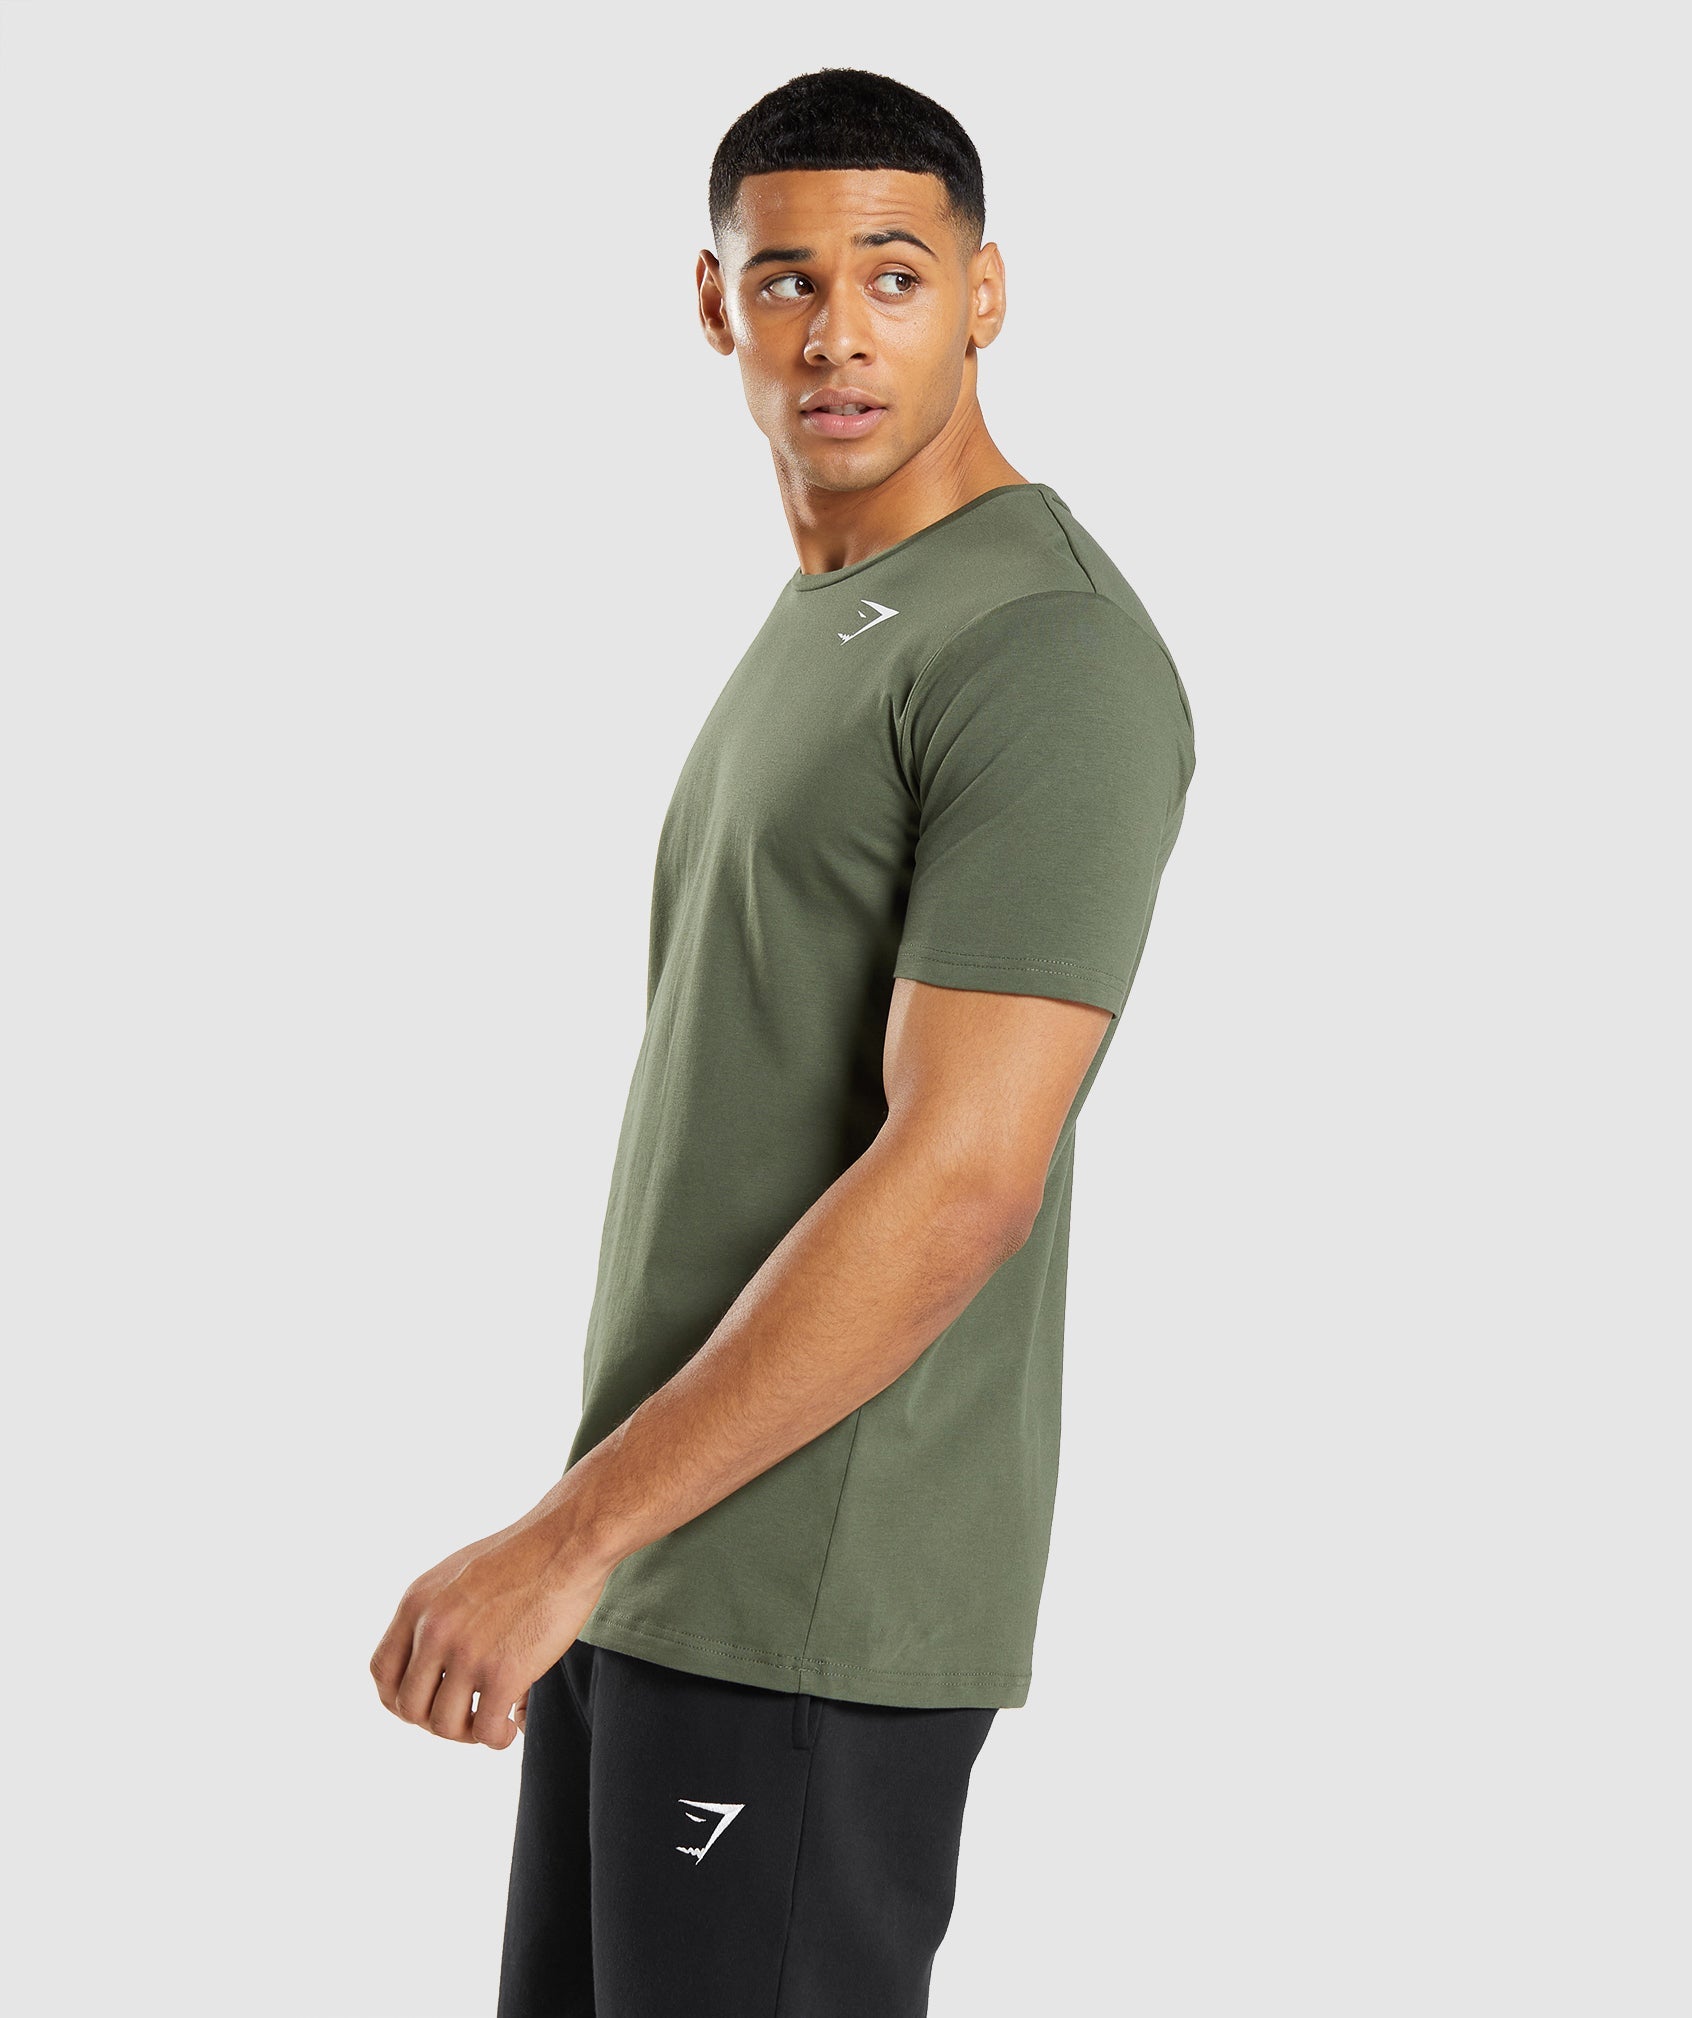 Gymshark Essential Tee - Is it worth the price?, HONEST Gymshark Review